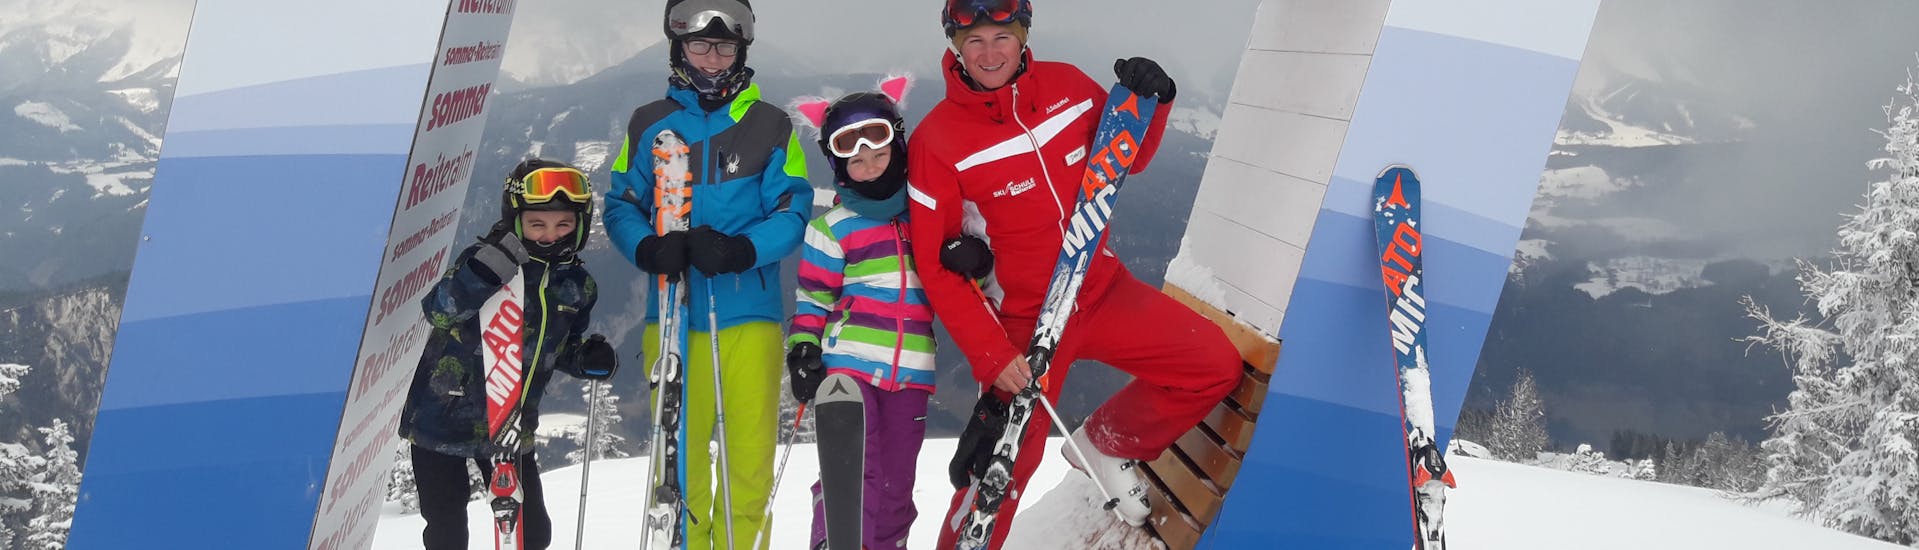 A group of skiers with their ski instructor from the Reiteralm Ski School during their kids ski lessons for all levels in Schladming.